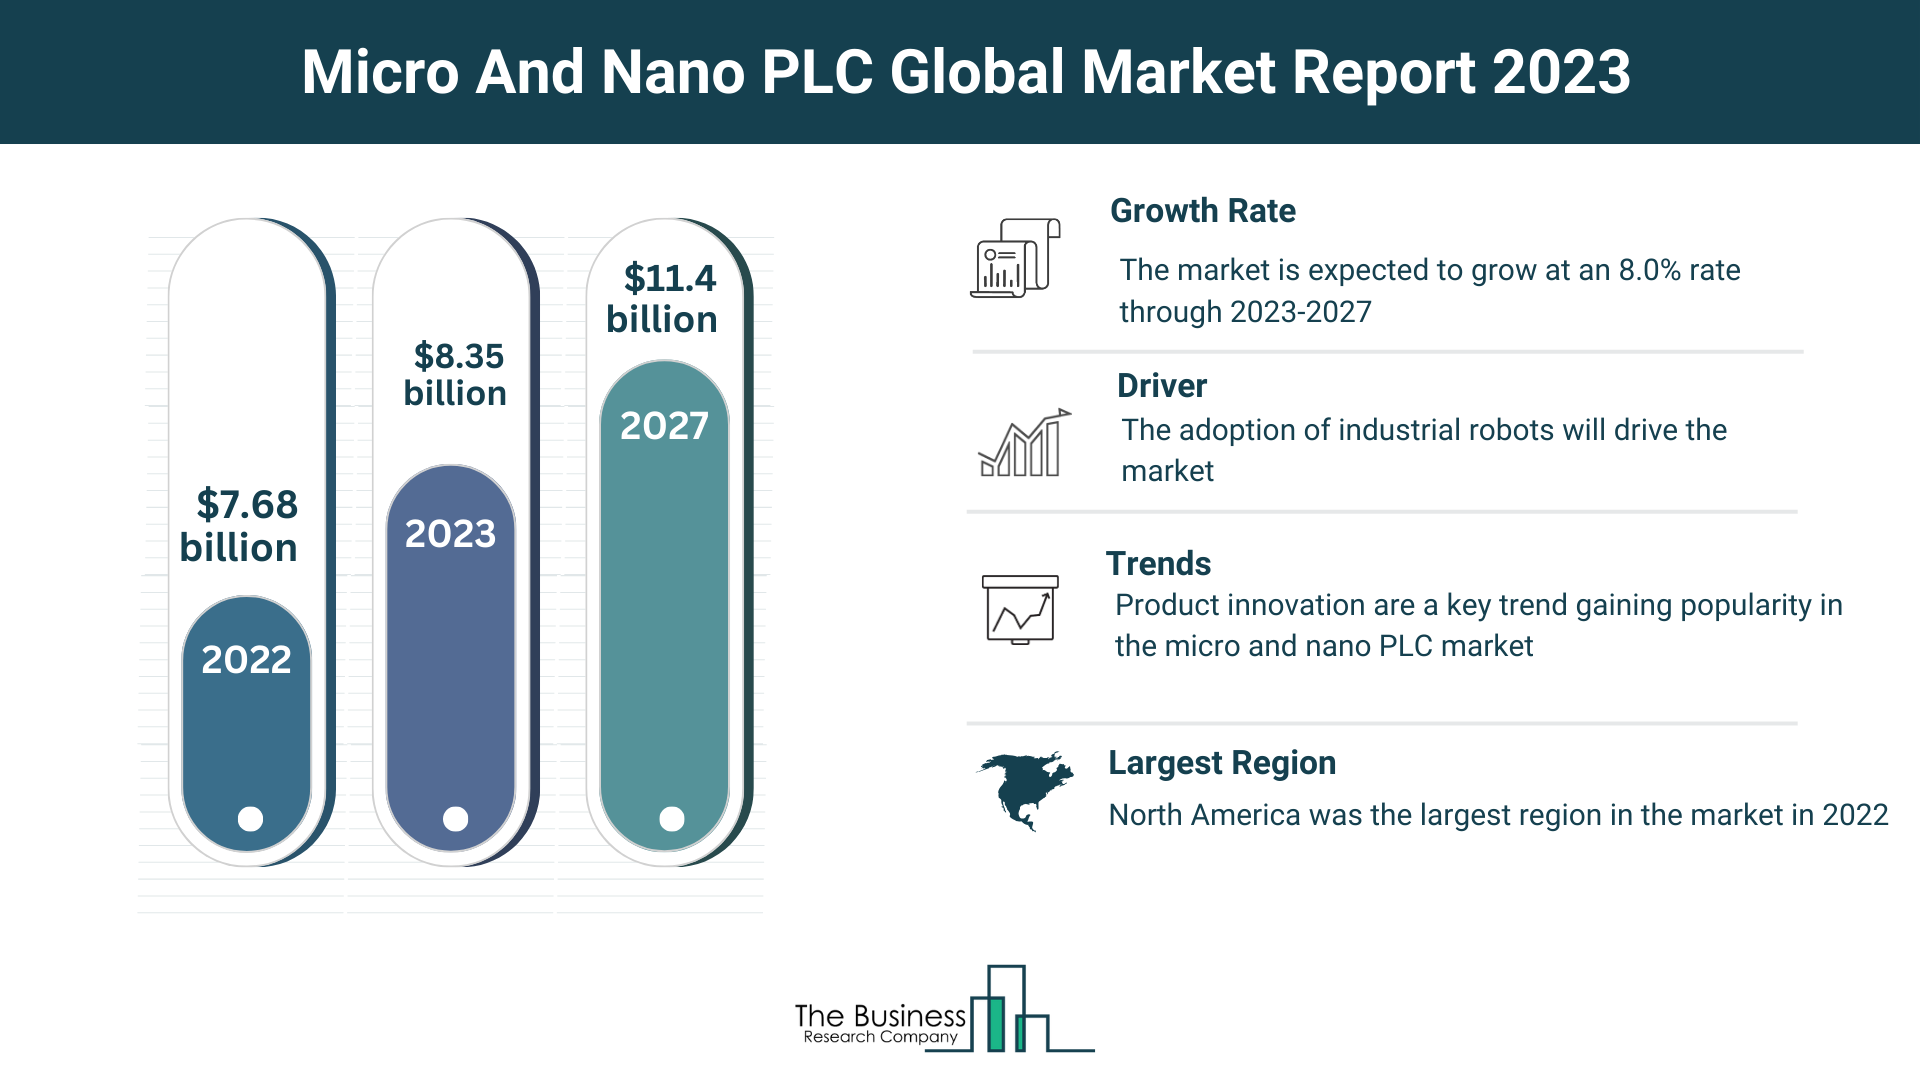 5 Key Takeaways From The Micro And Nano PLC Market Report 2023